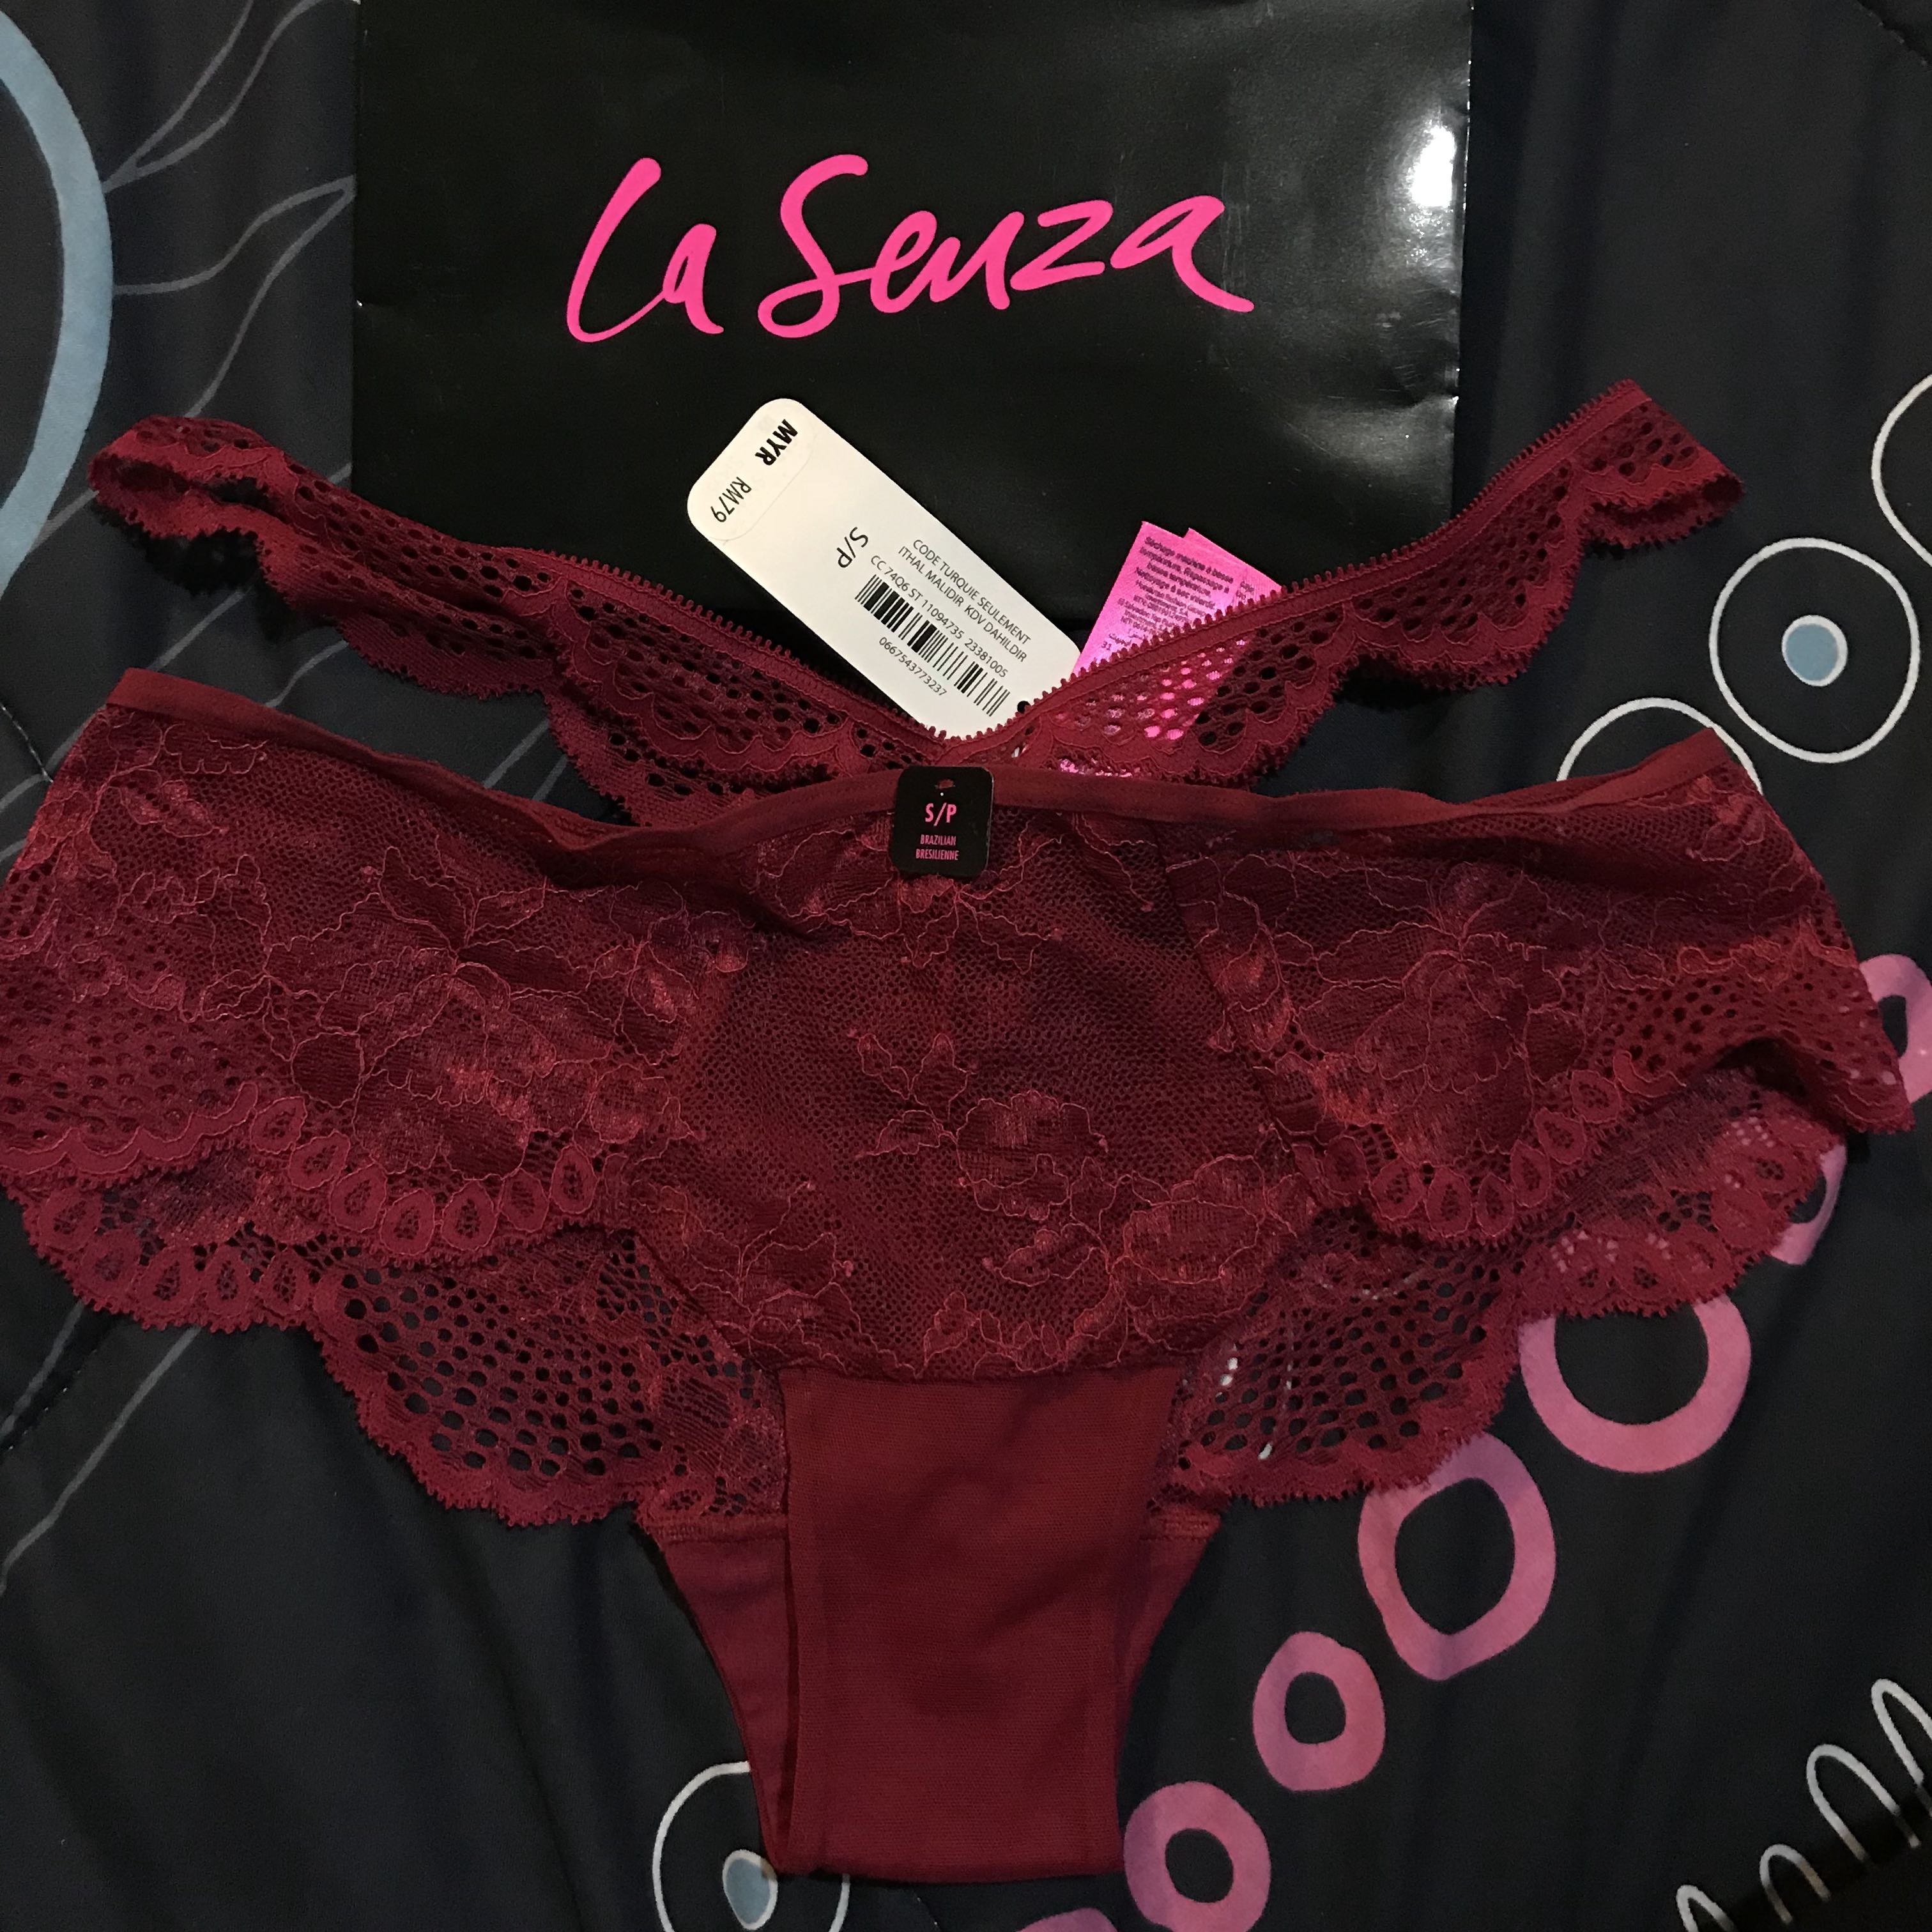 La Senza - 📣ONLINE SALE STARTS TODAY! Hurry and stock up on bras & panties  before they're gone.  #lasenza #lingerie #shopping  #sale #lasenzabv